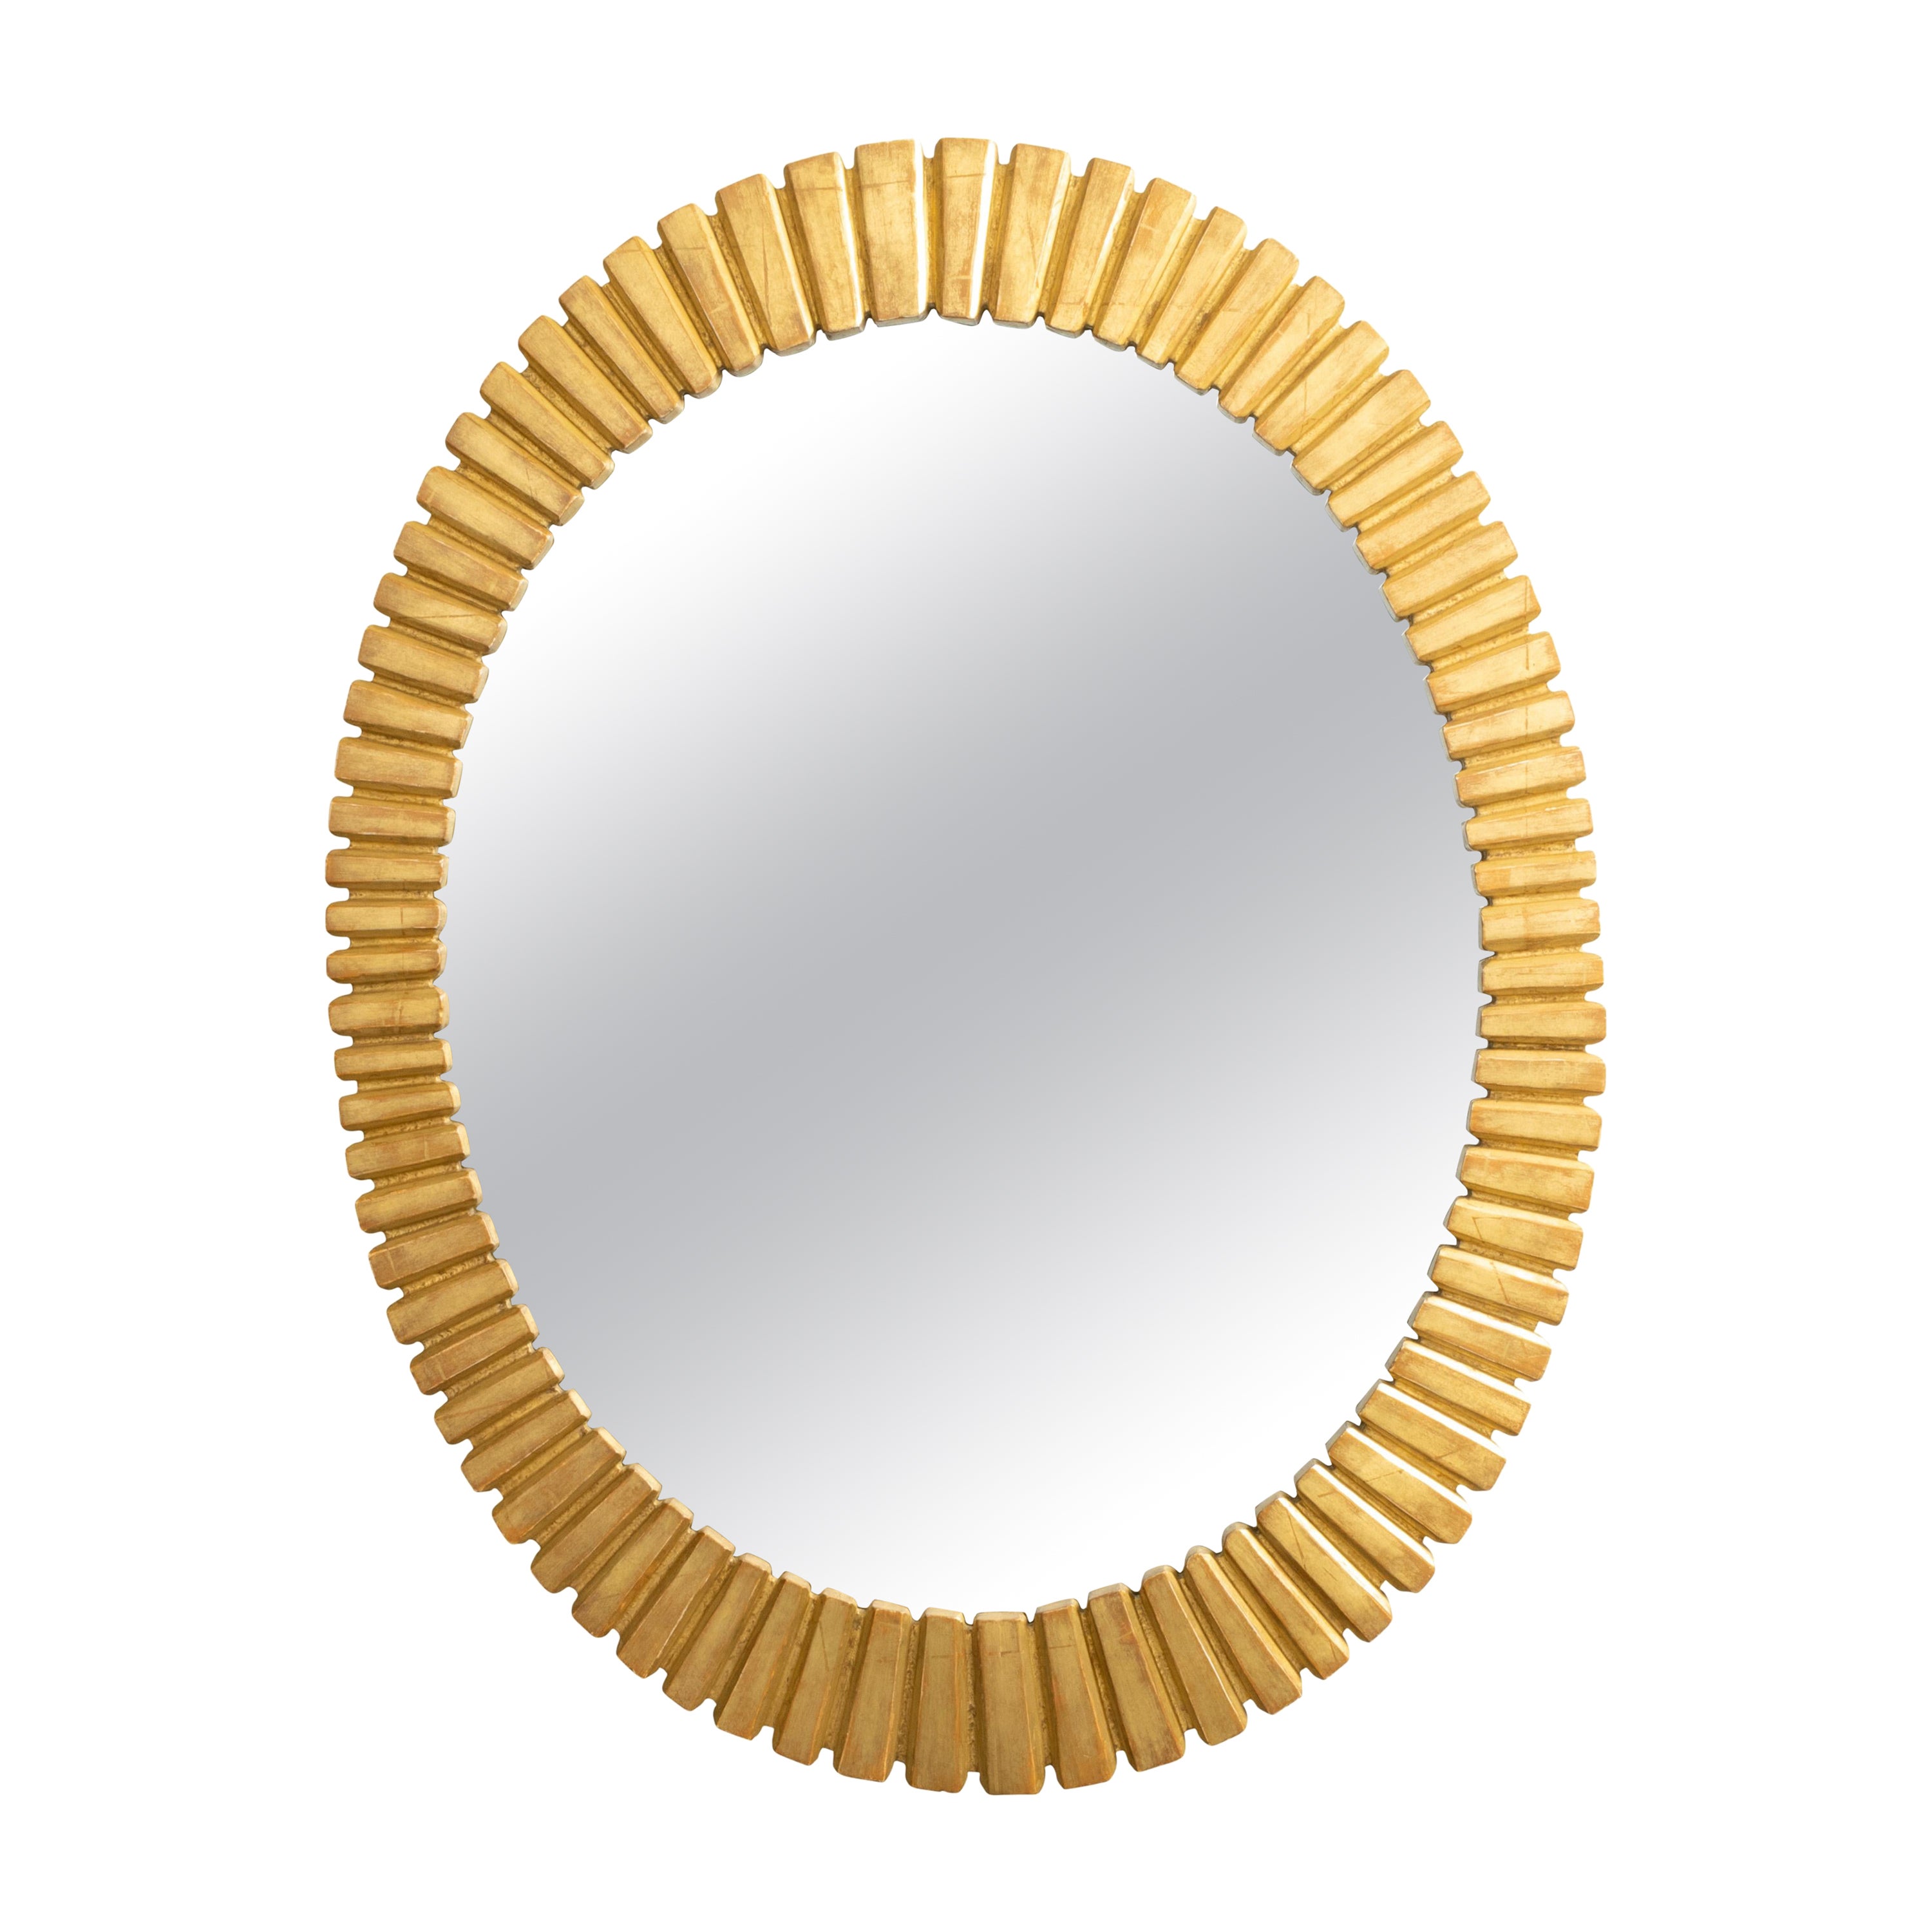 French Oval Midcentury Giltwood Mirror with Grooved Radiating Patterns